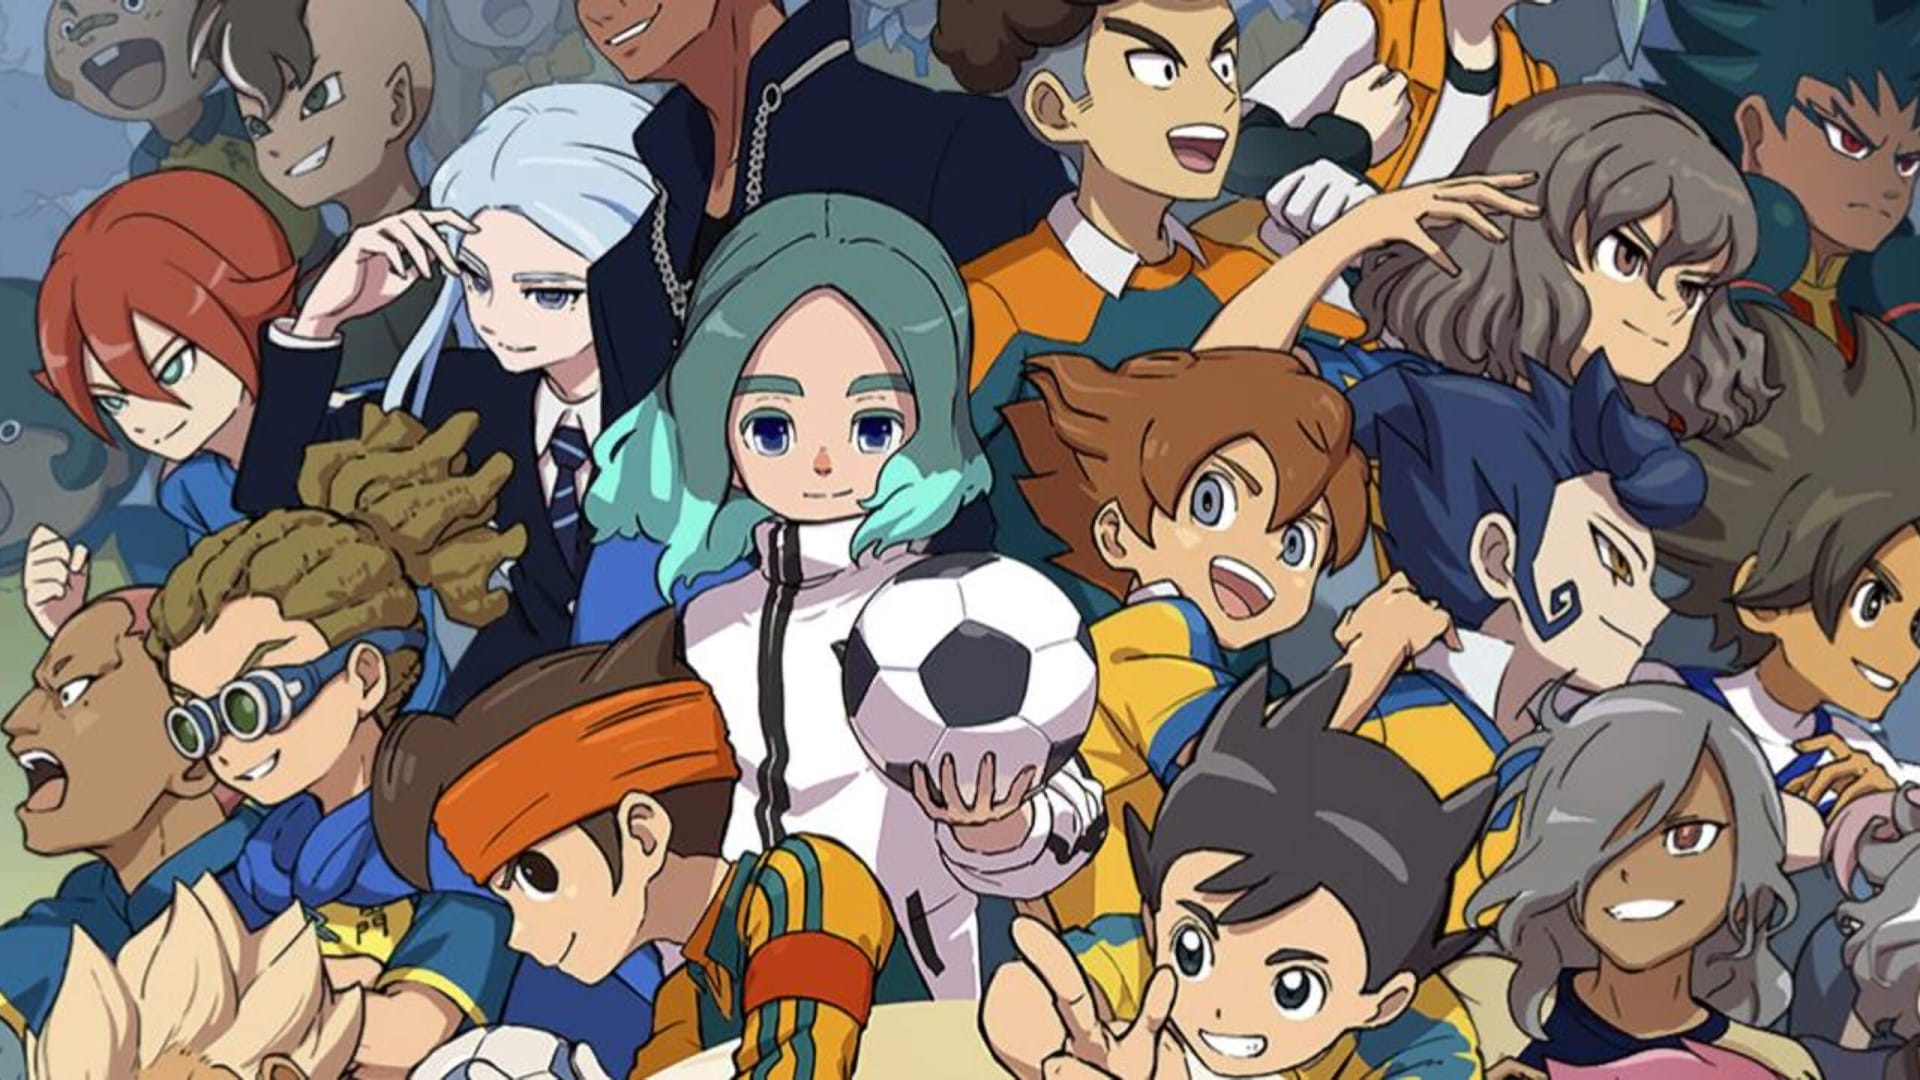 Long-Awaited Soccer RPG Inazuma Eleven: Victory Road Also Coming to PC, Level-5 Confirms